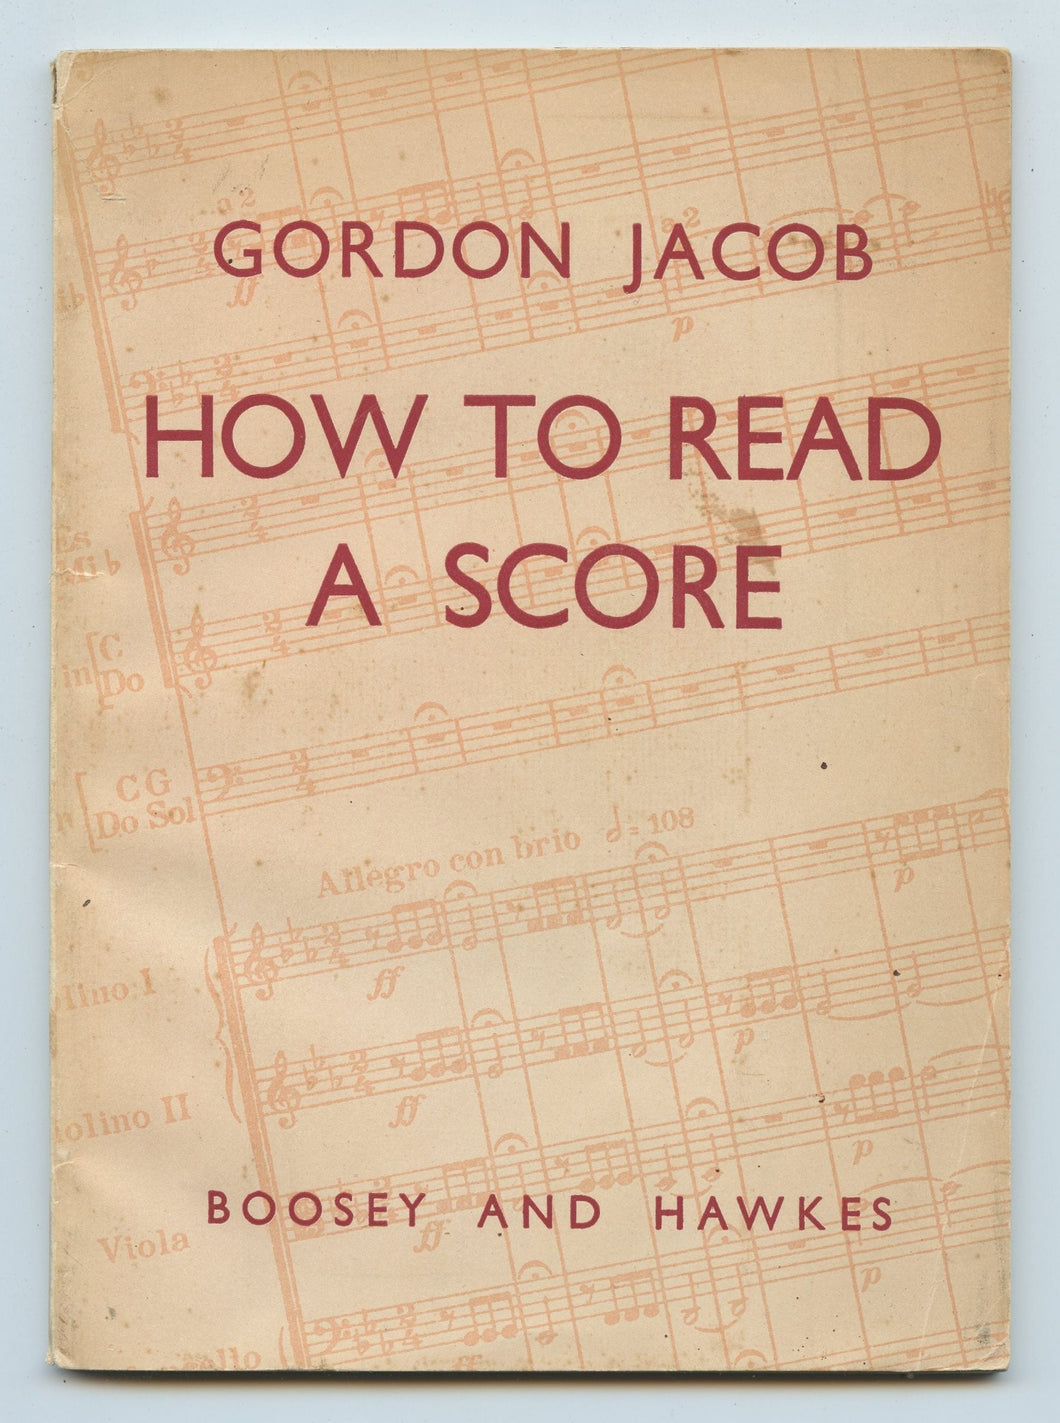 How To Read A Score